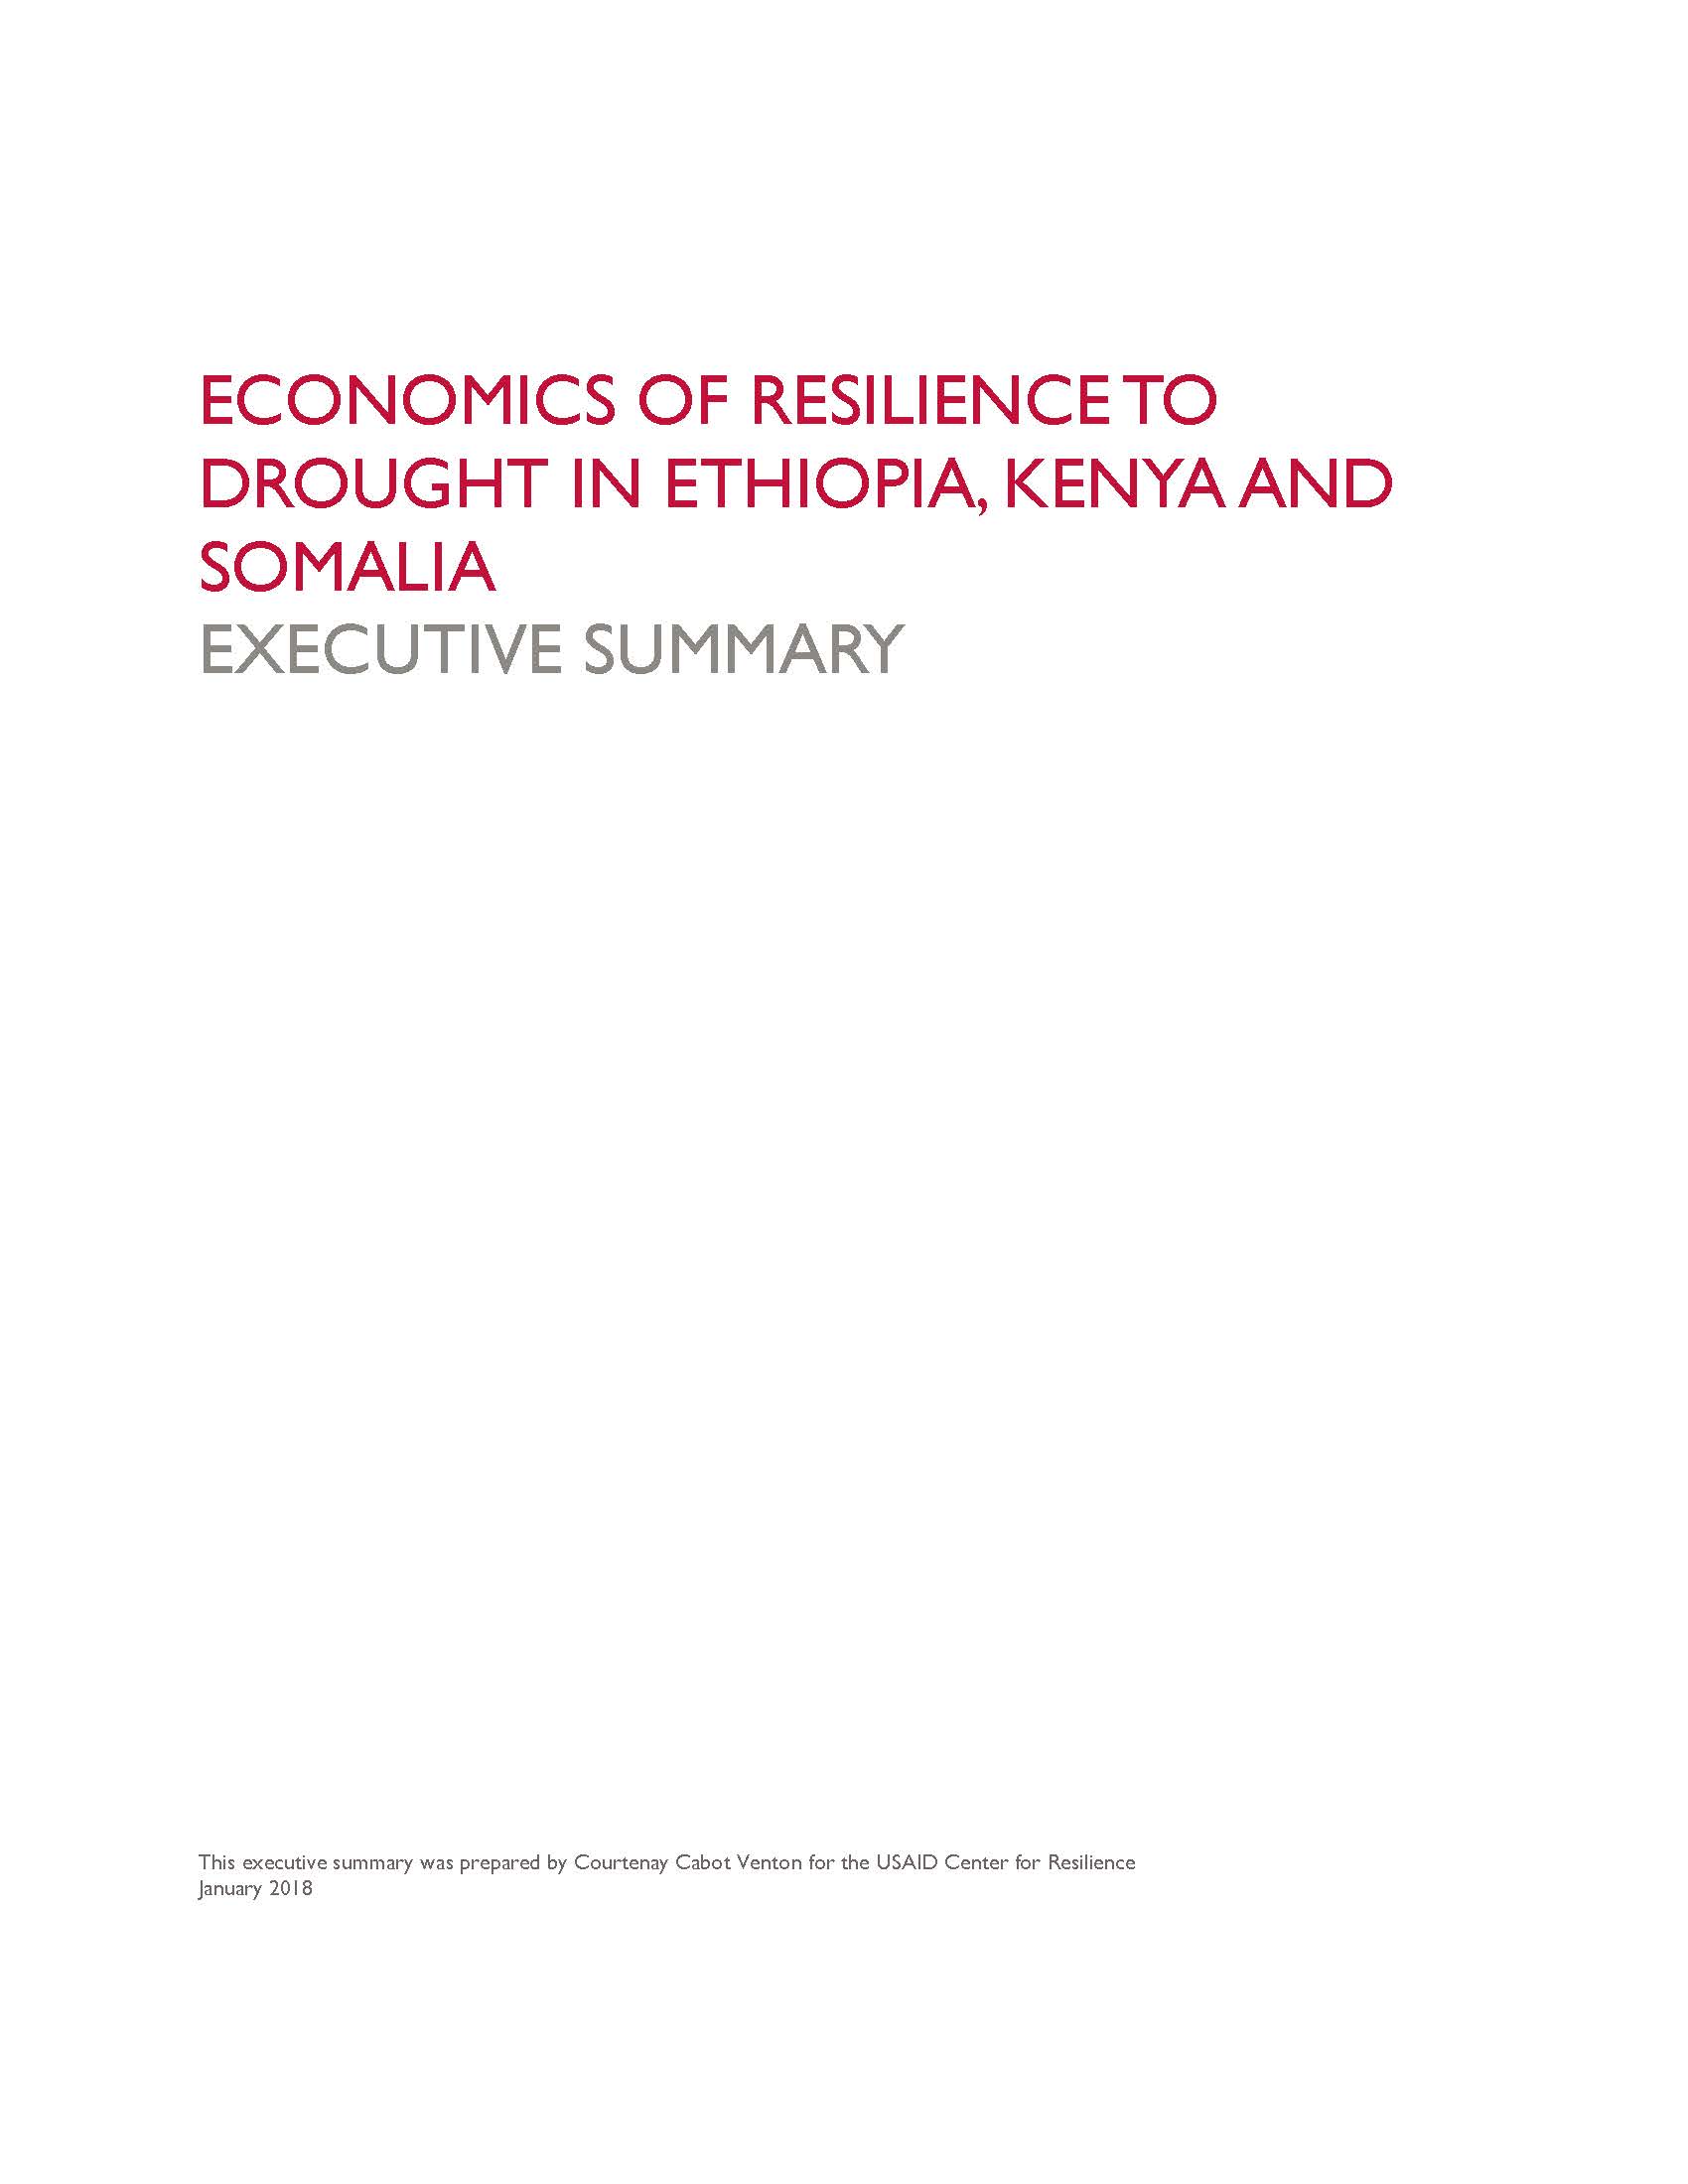 Economics of Resilience to Drought: Executive Summary